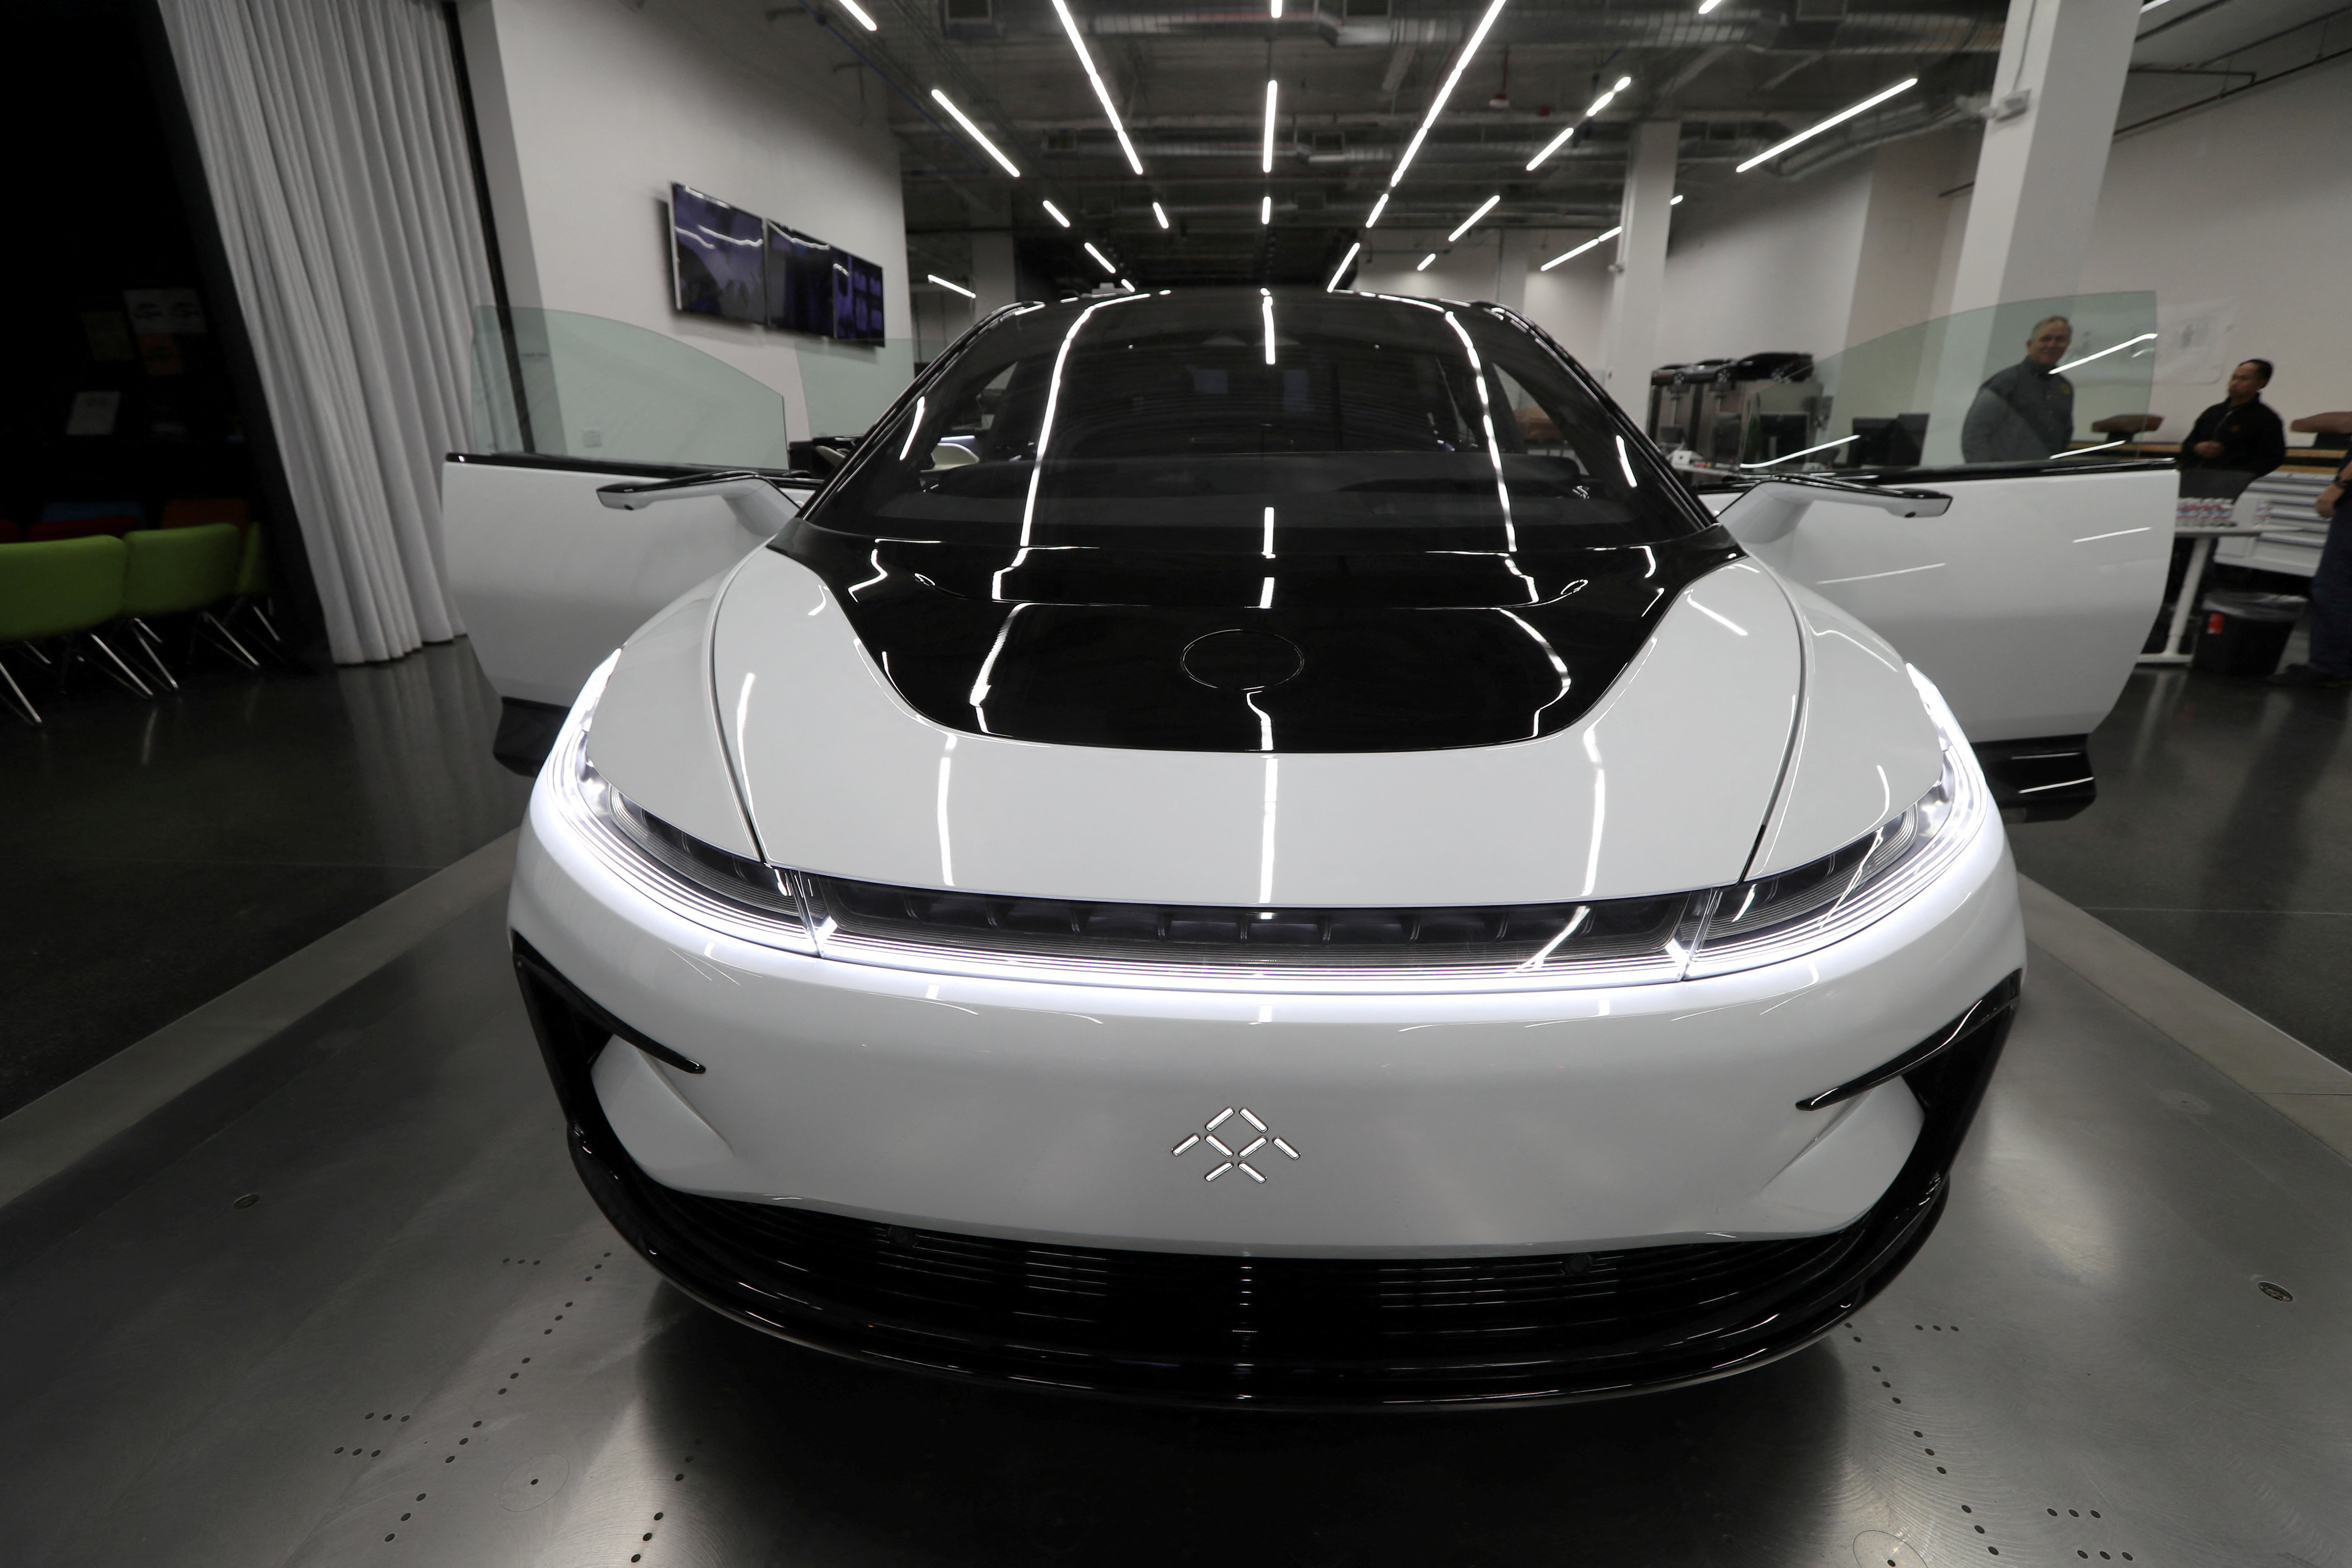 Faraday Future's luxury electric car FF91 is seen at the company's headquarters in Gardena